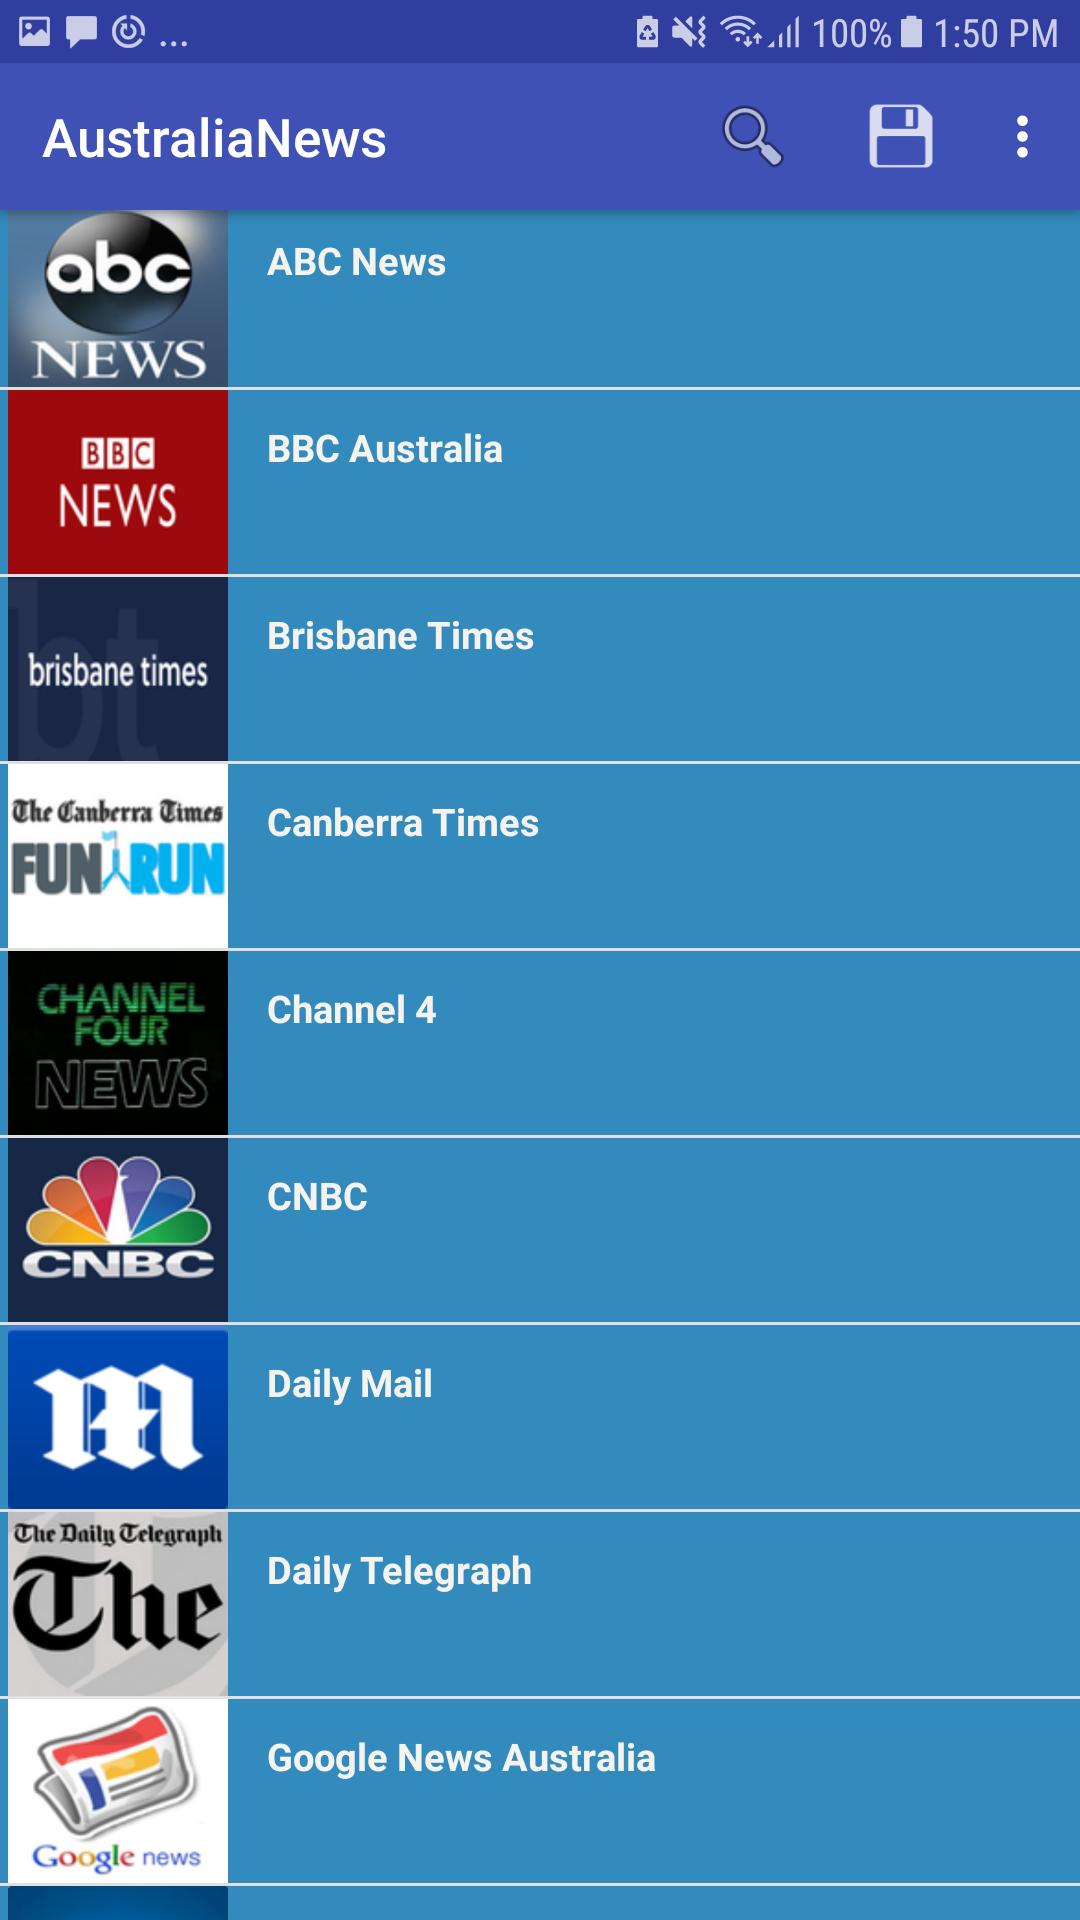 Australian News App | All Australia News papers for Android - APK Download